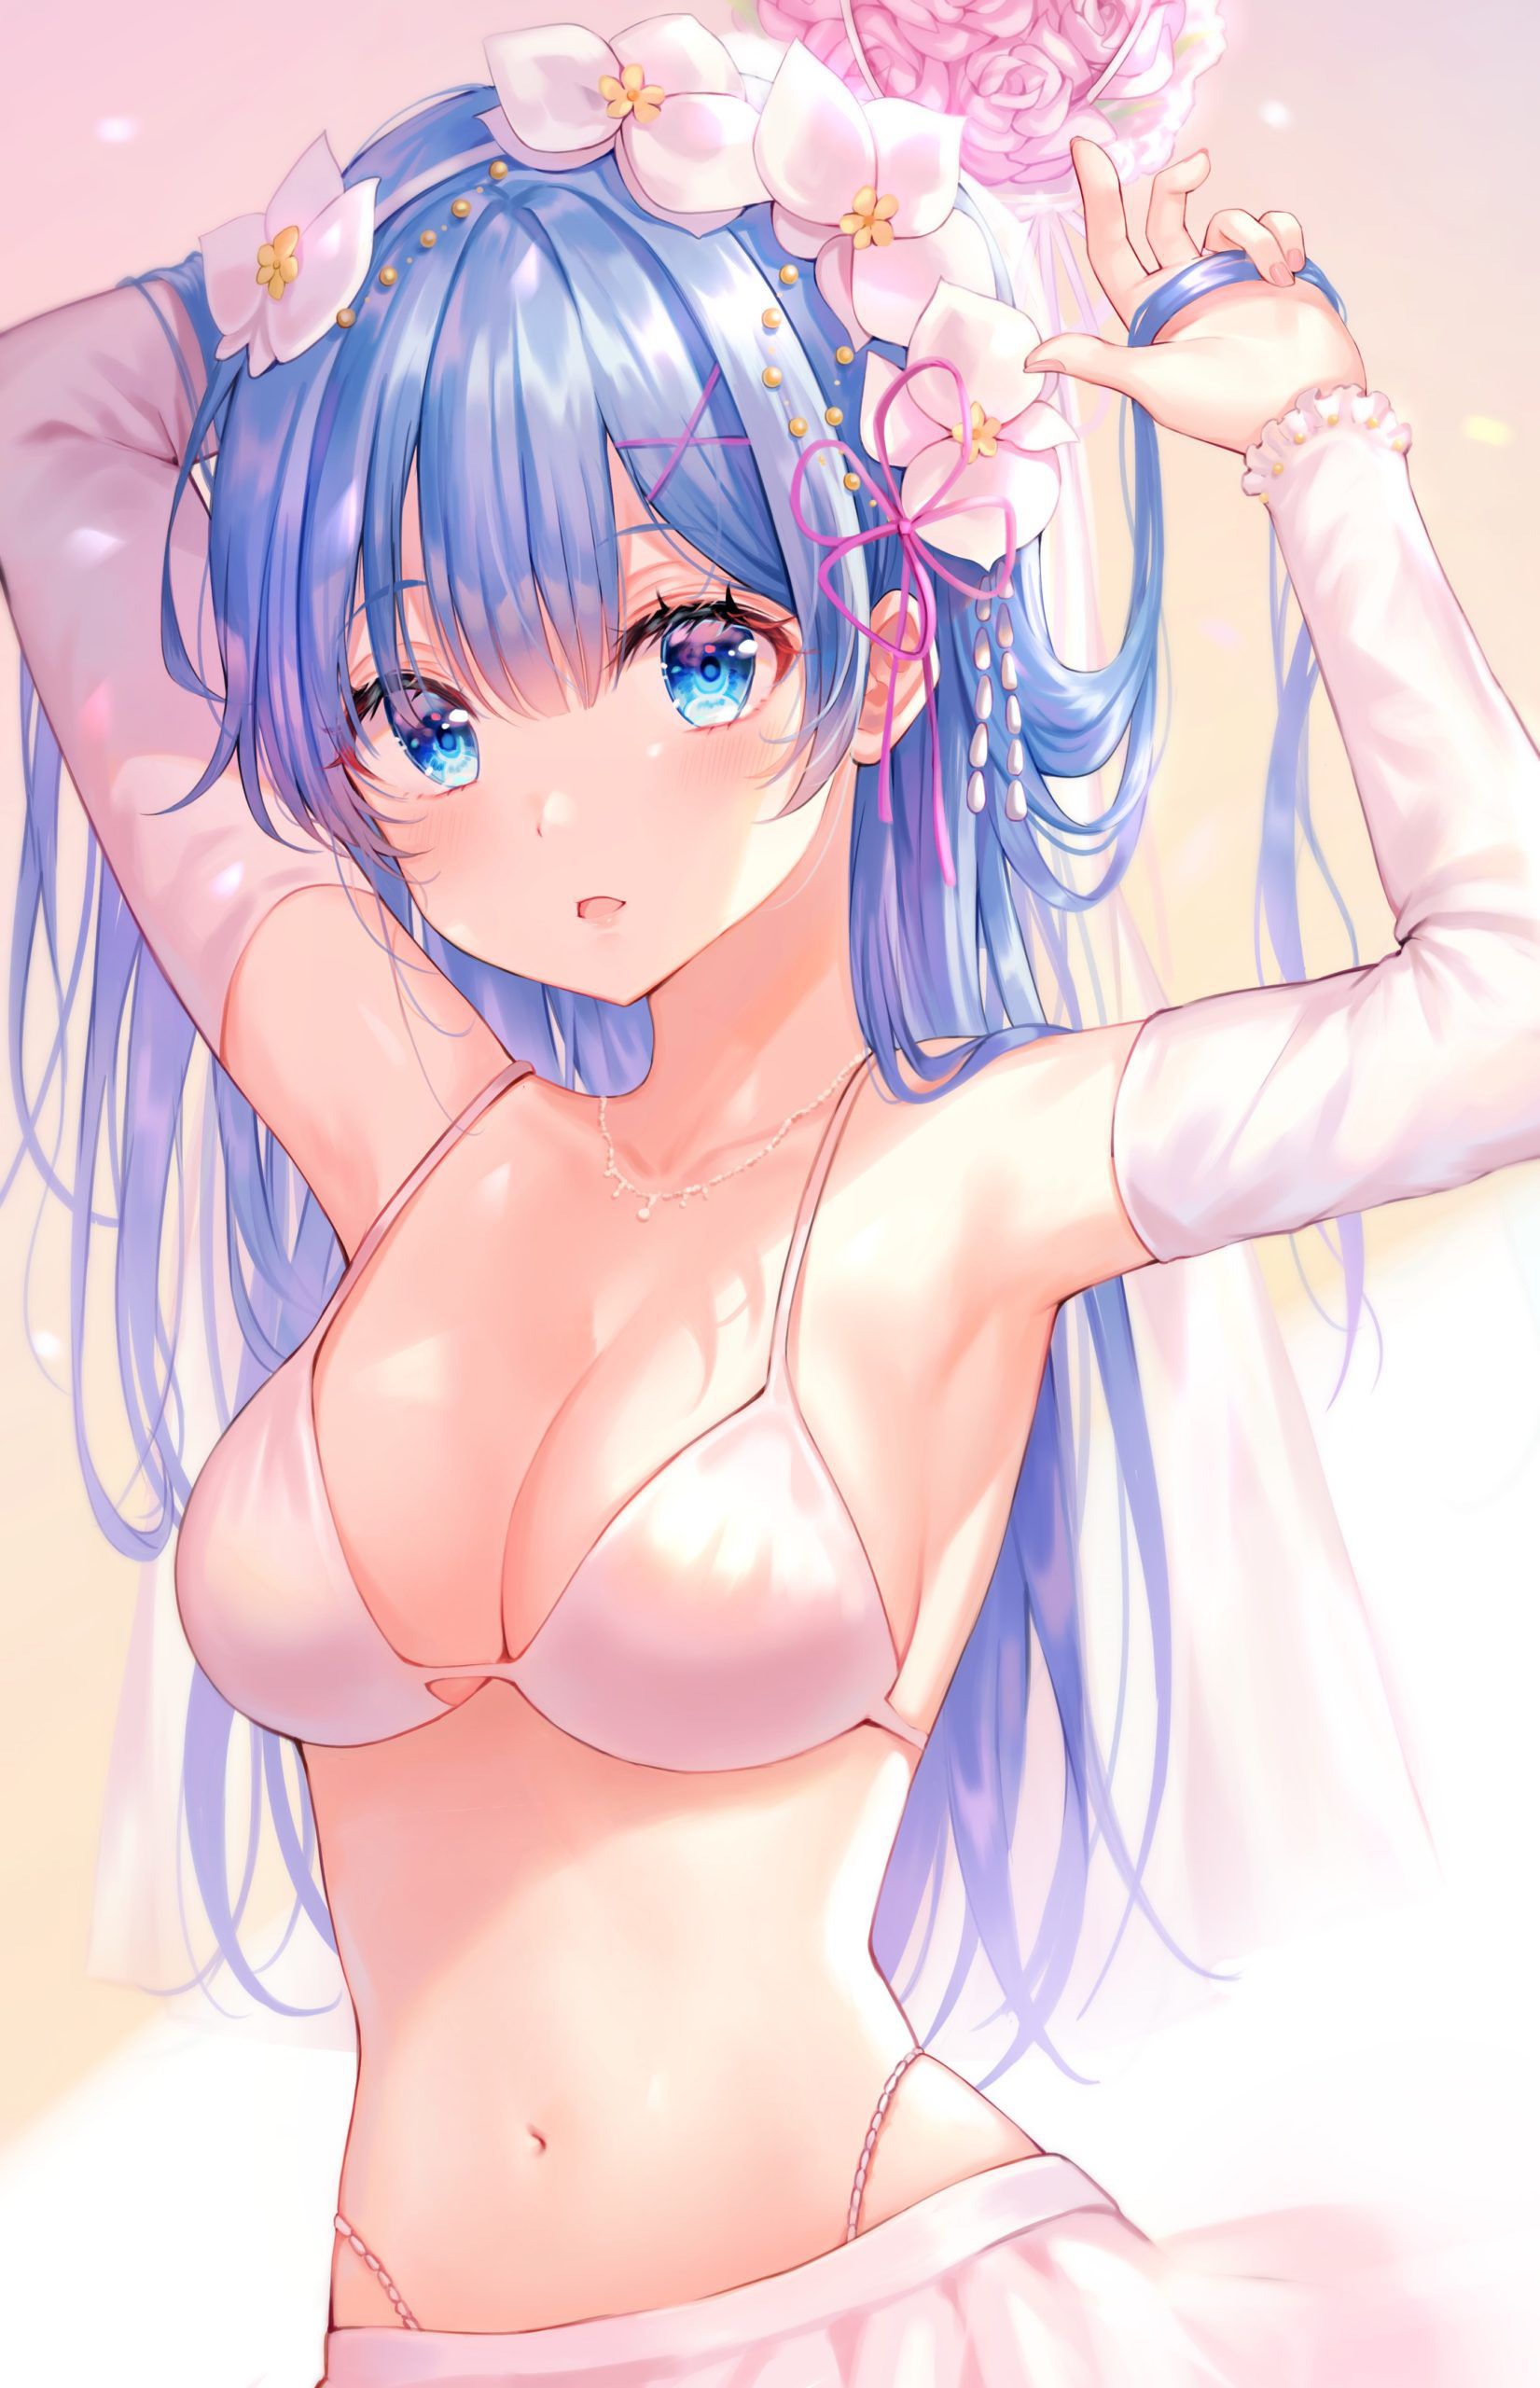 Erotic image of "blue hair beauty" that does not exist in reality even if it is a staple of water attribute character in fantasy 5